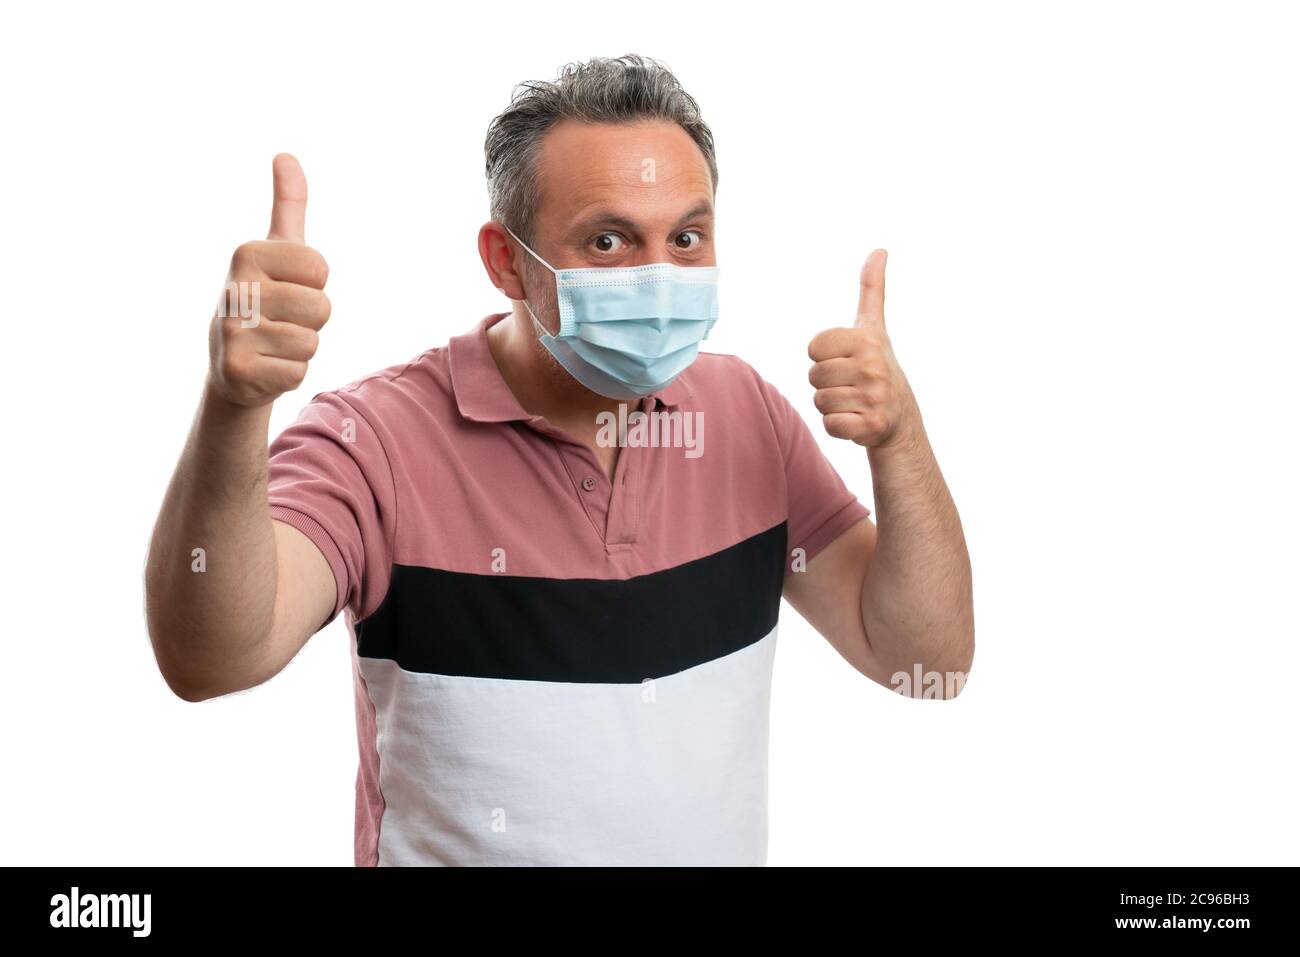 Male wearing medical disposable mask showing thumbs-up gesture as hope to protect against covid or corrona virus concept Stock Photo